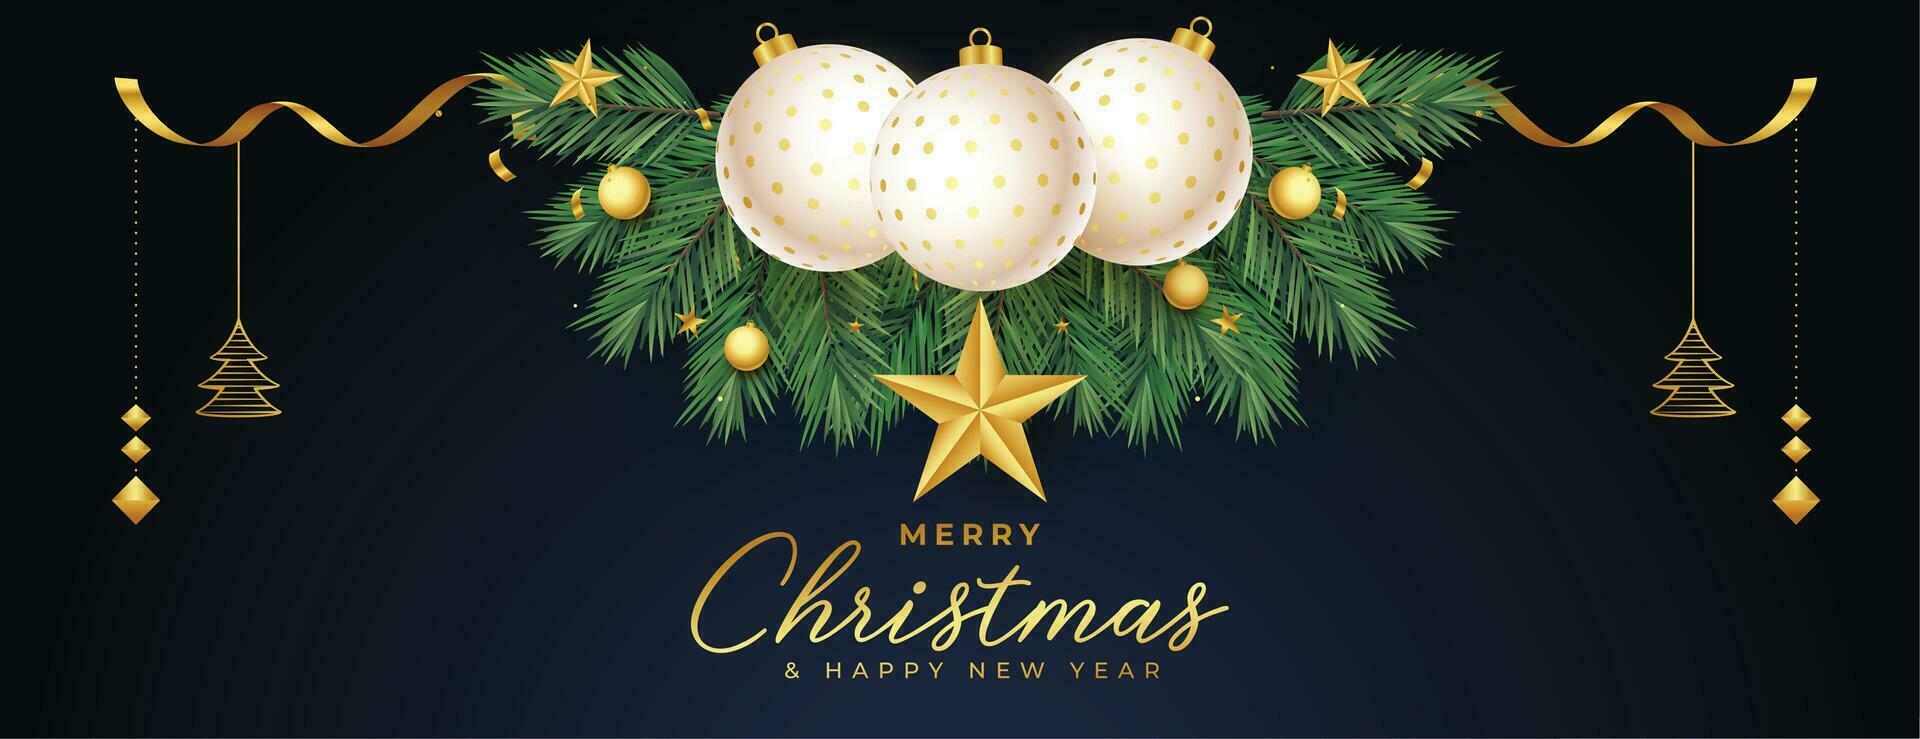 merry christmas horizontal banner with 3d realistic render elements vector